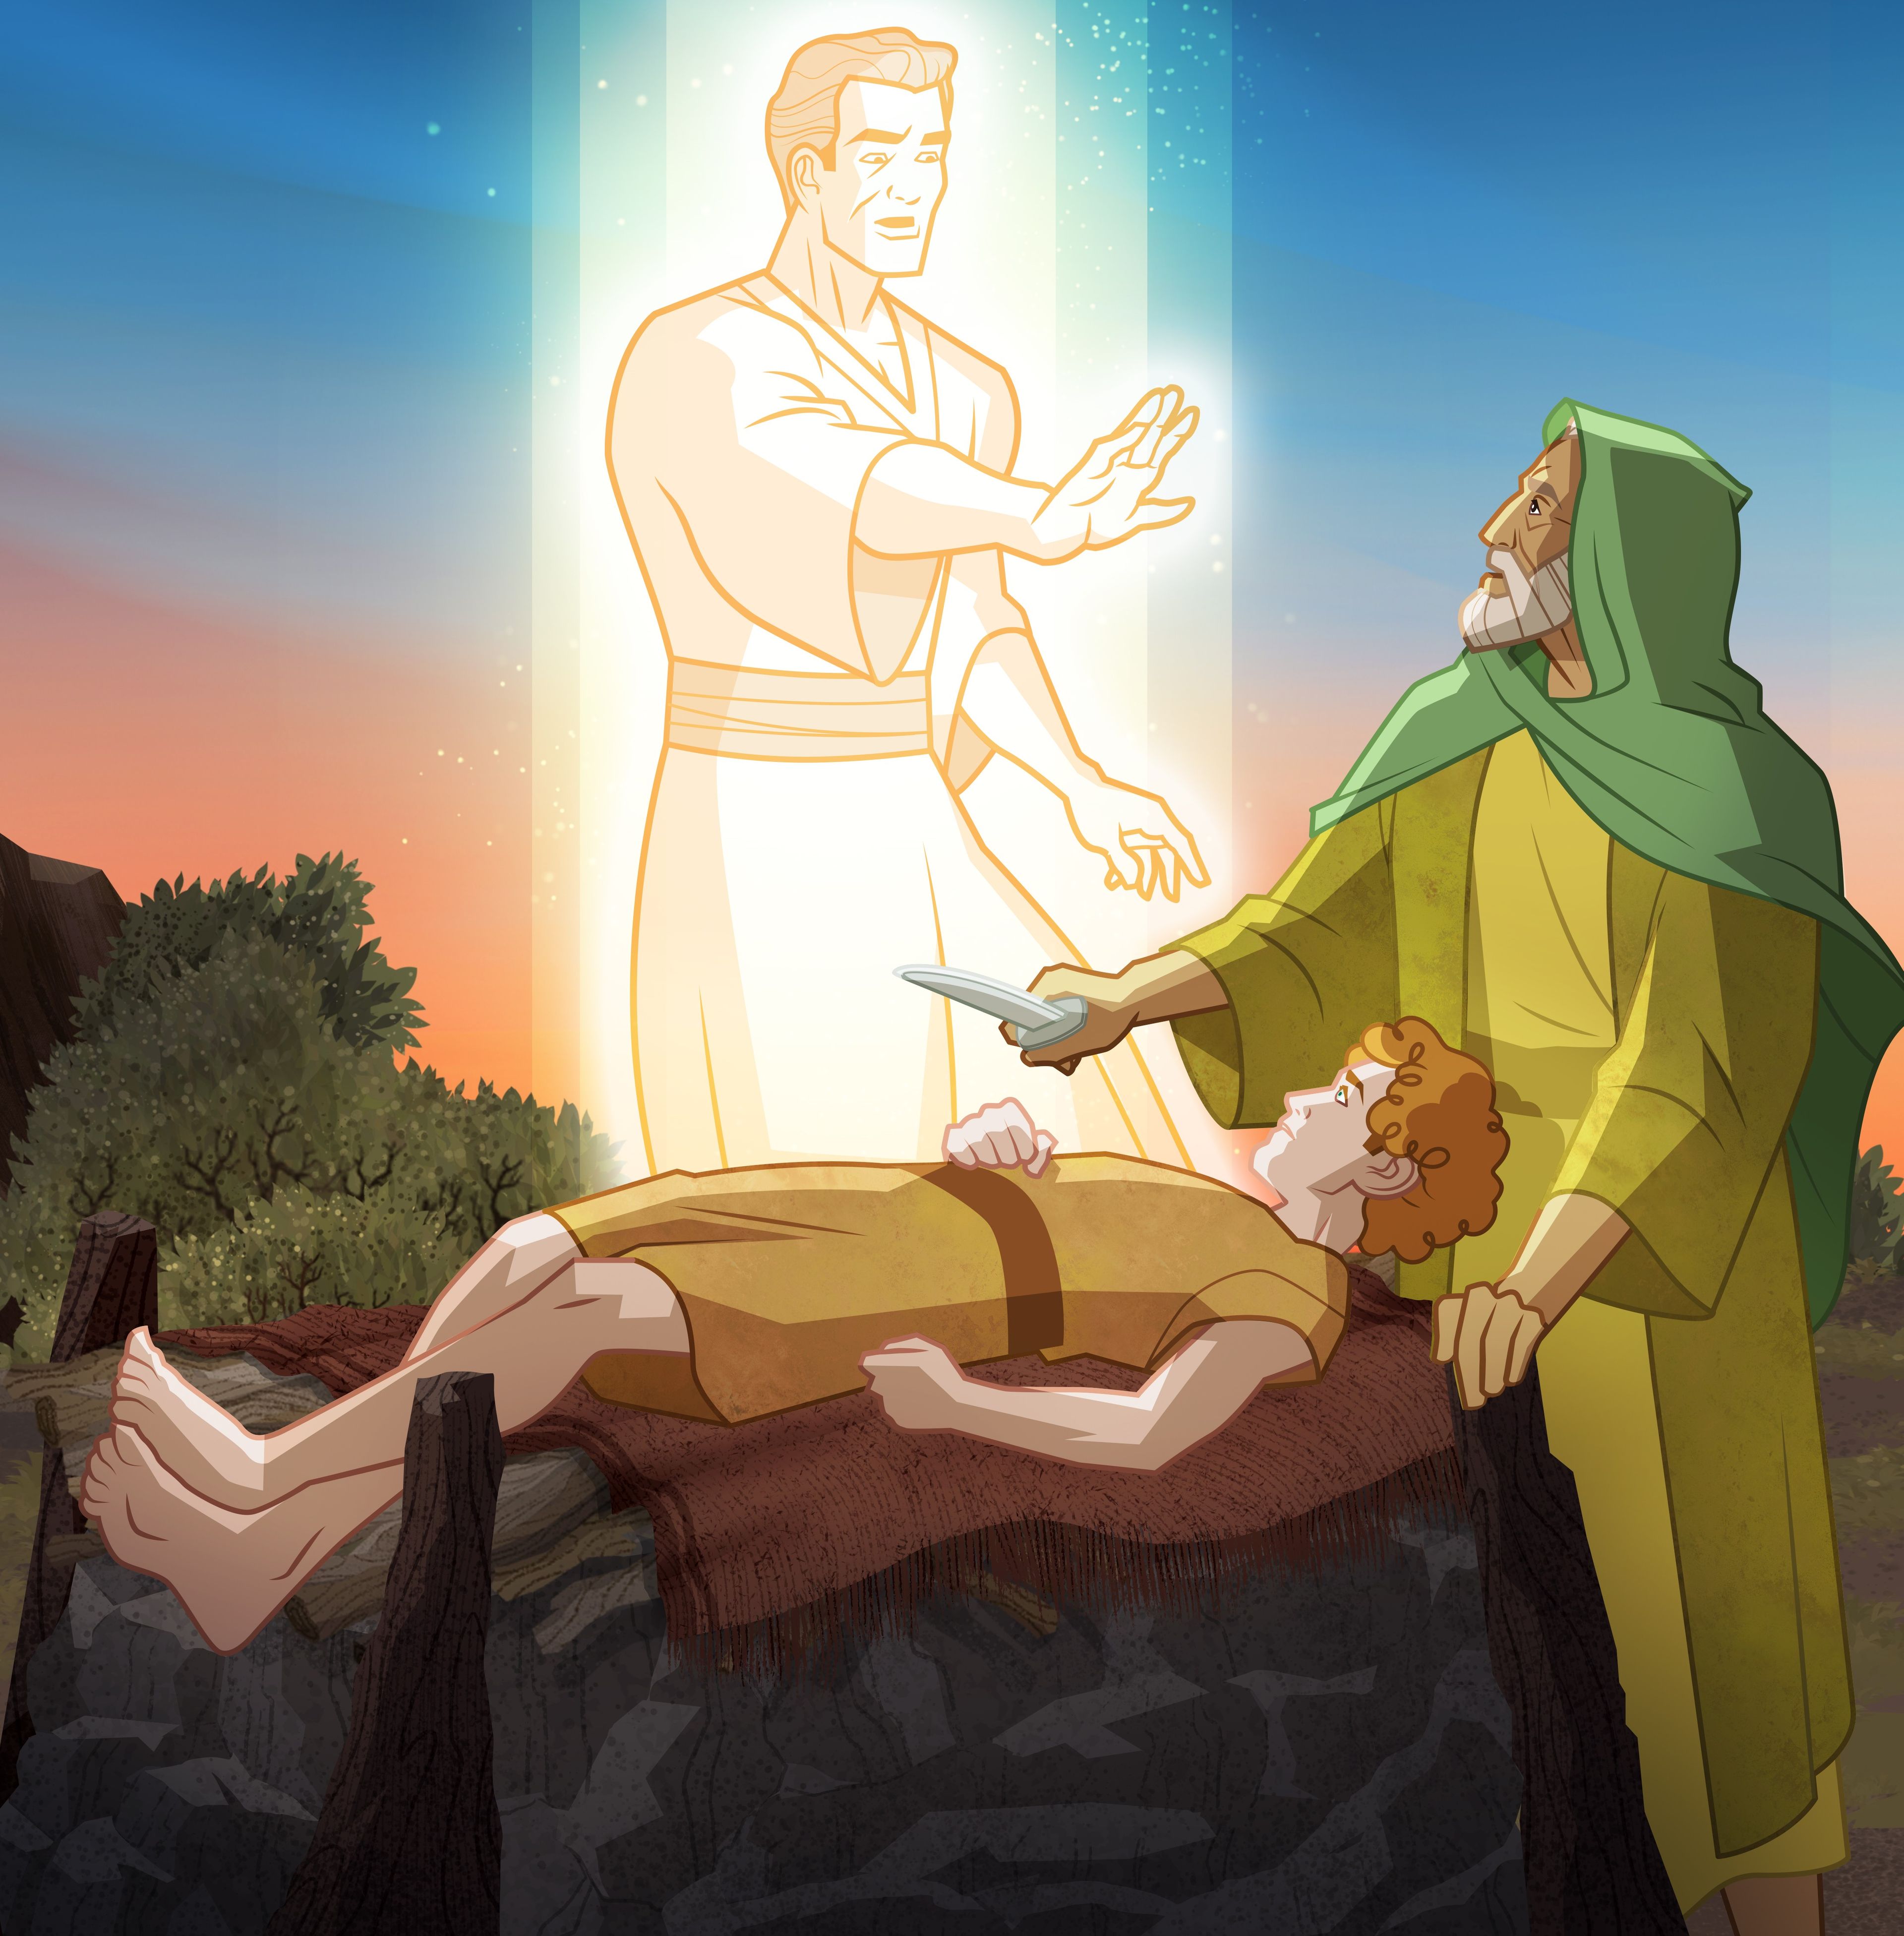 Illustration of an angel appearing to Abraham and Isaac. Genesis 22:10–12